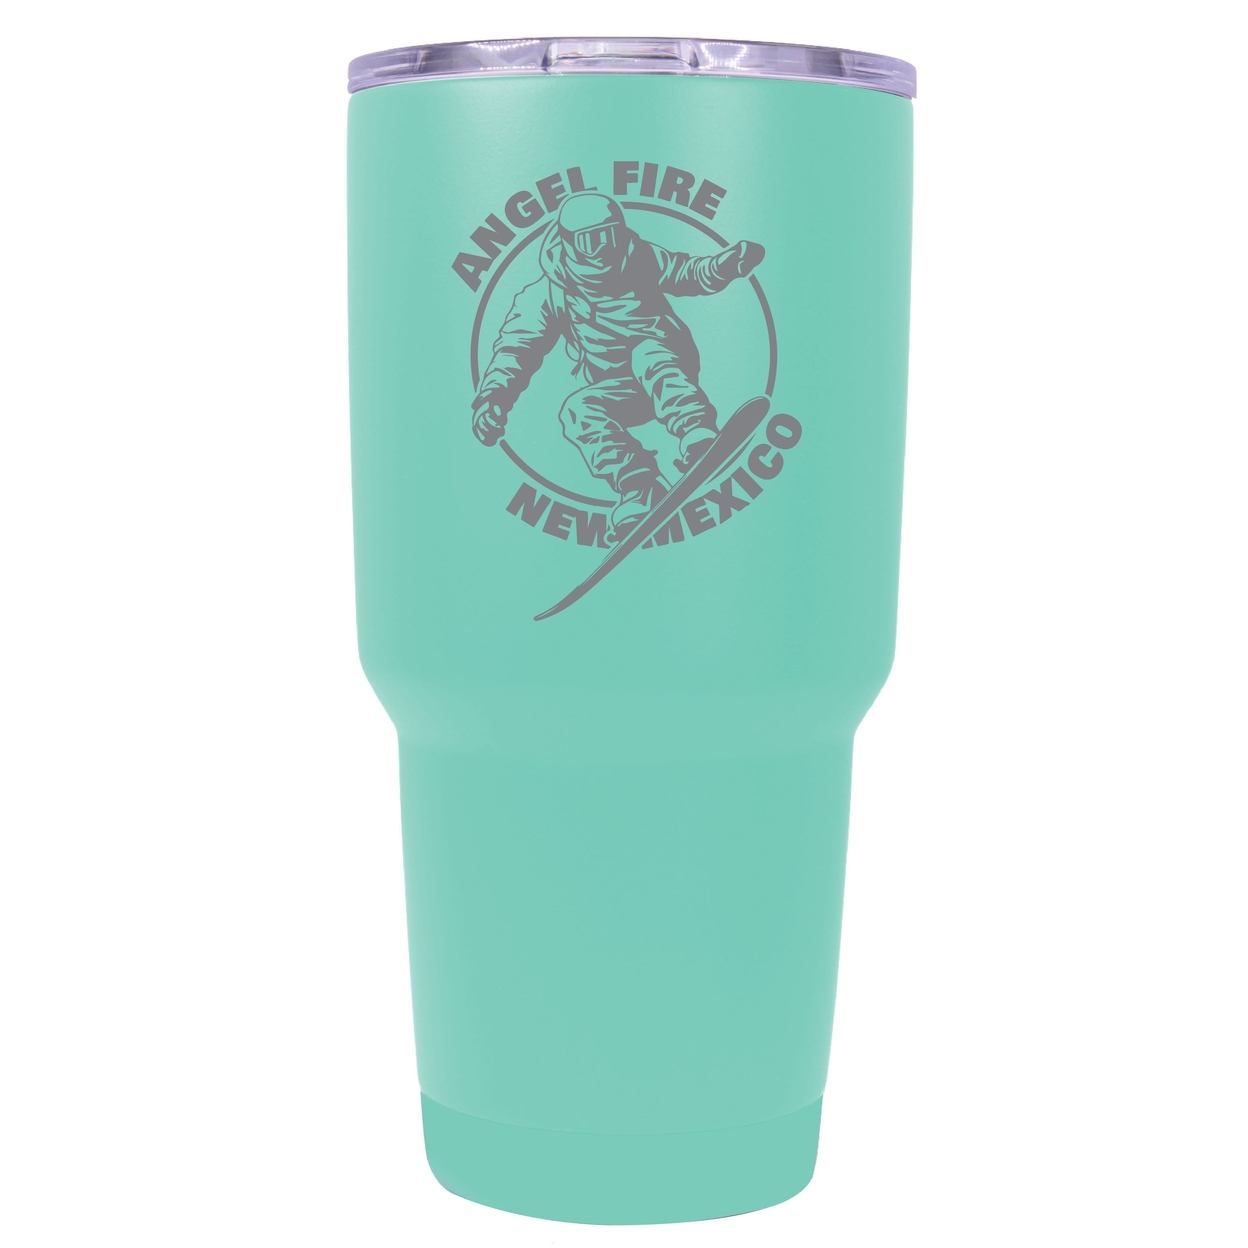 Angel Fire New Mexico Souvenir 24 Oz Engraved Insulated Stainless Steel Tumbler - Red,,4-Pack